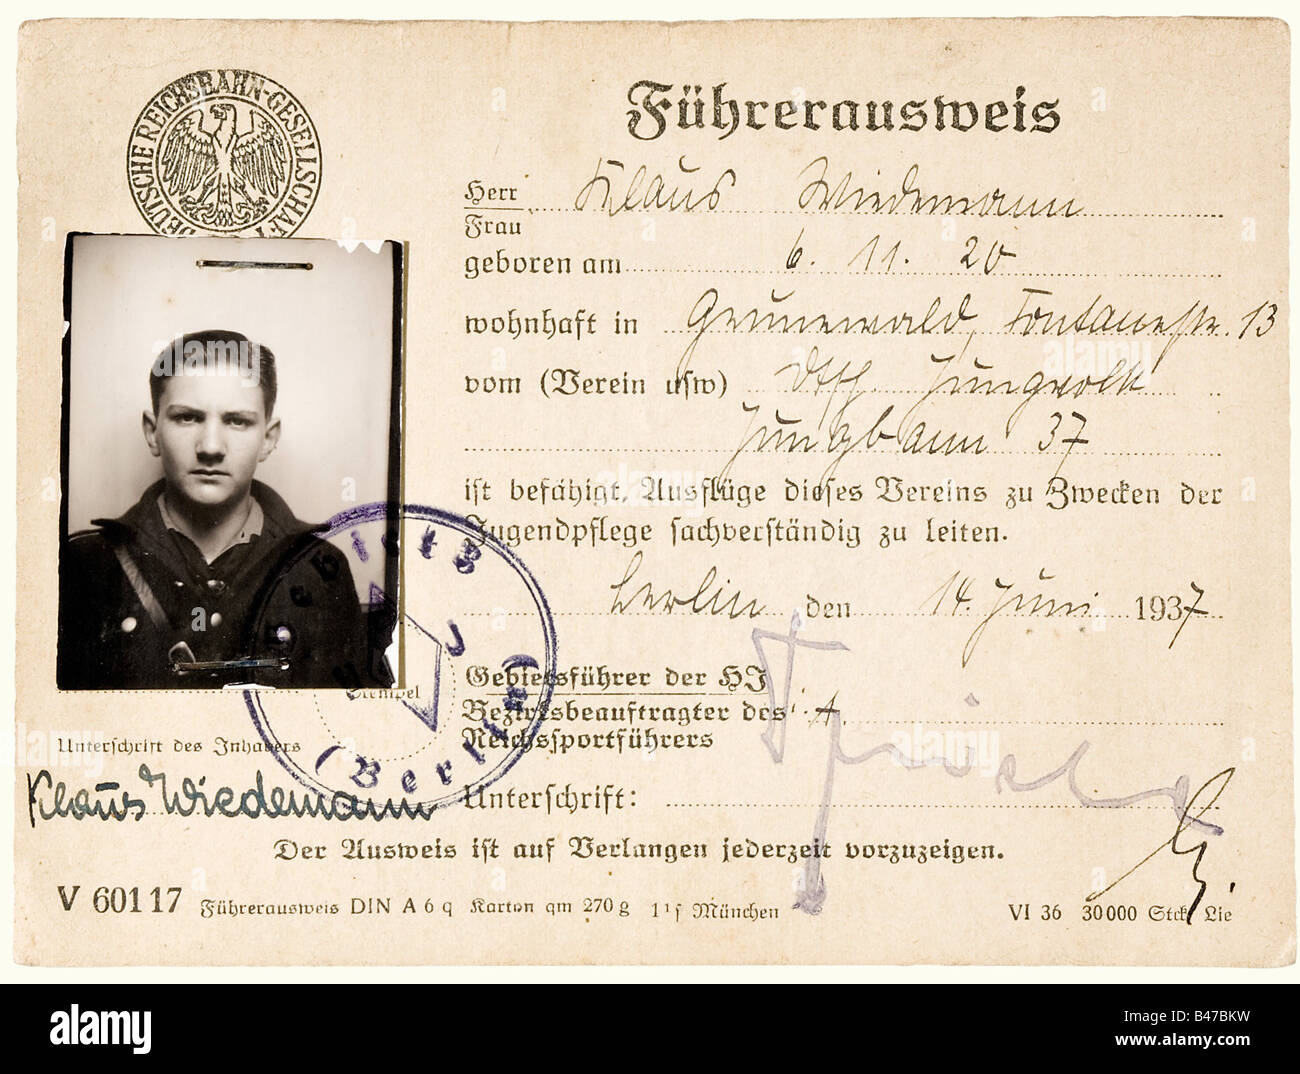 Klaus Wiedemann, DJ membership pass, chronicle/photo album 'Feldscher Fähnlein' and photos from the estate of the son of Hitler's personal adjutant (1935-39) Fritz Wiedemann. DJ membership pass from the 14th June 1937 with photo. 'Chronik des Feldscher Fähnleins', teamwork of the patrol's leading team in the war year 1939 with various handwritten articles about the summer camps and big trips 1936 - 1939, including historic, historical, people, 1930s, 20th century, League of German Girls, Band of German Maidens, youth organization, youth organizations, NS, Natio, Stock Photo